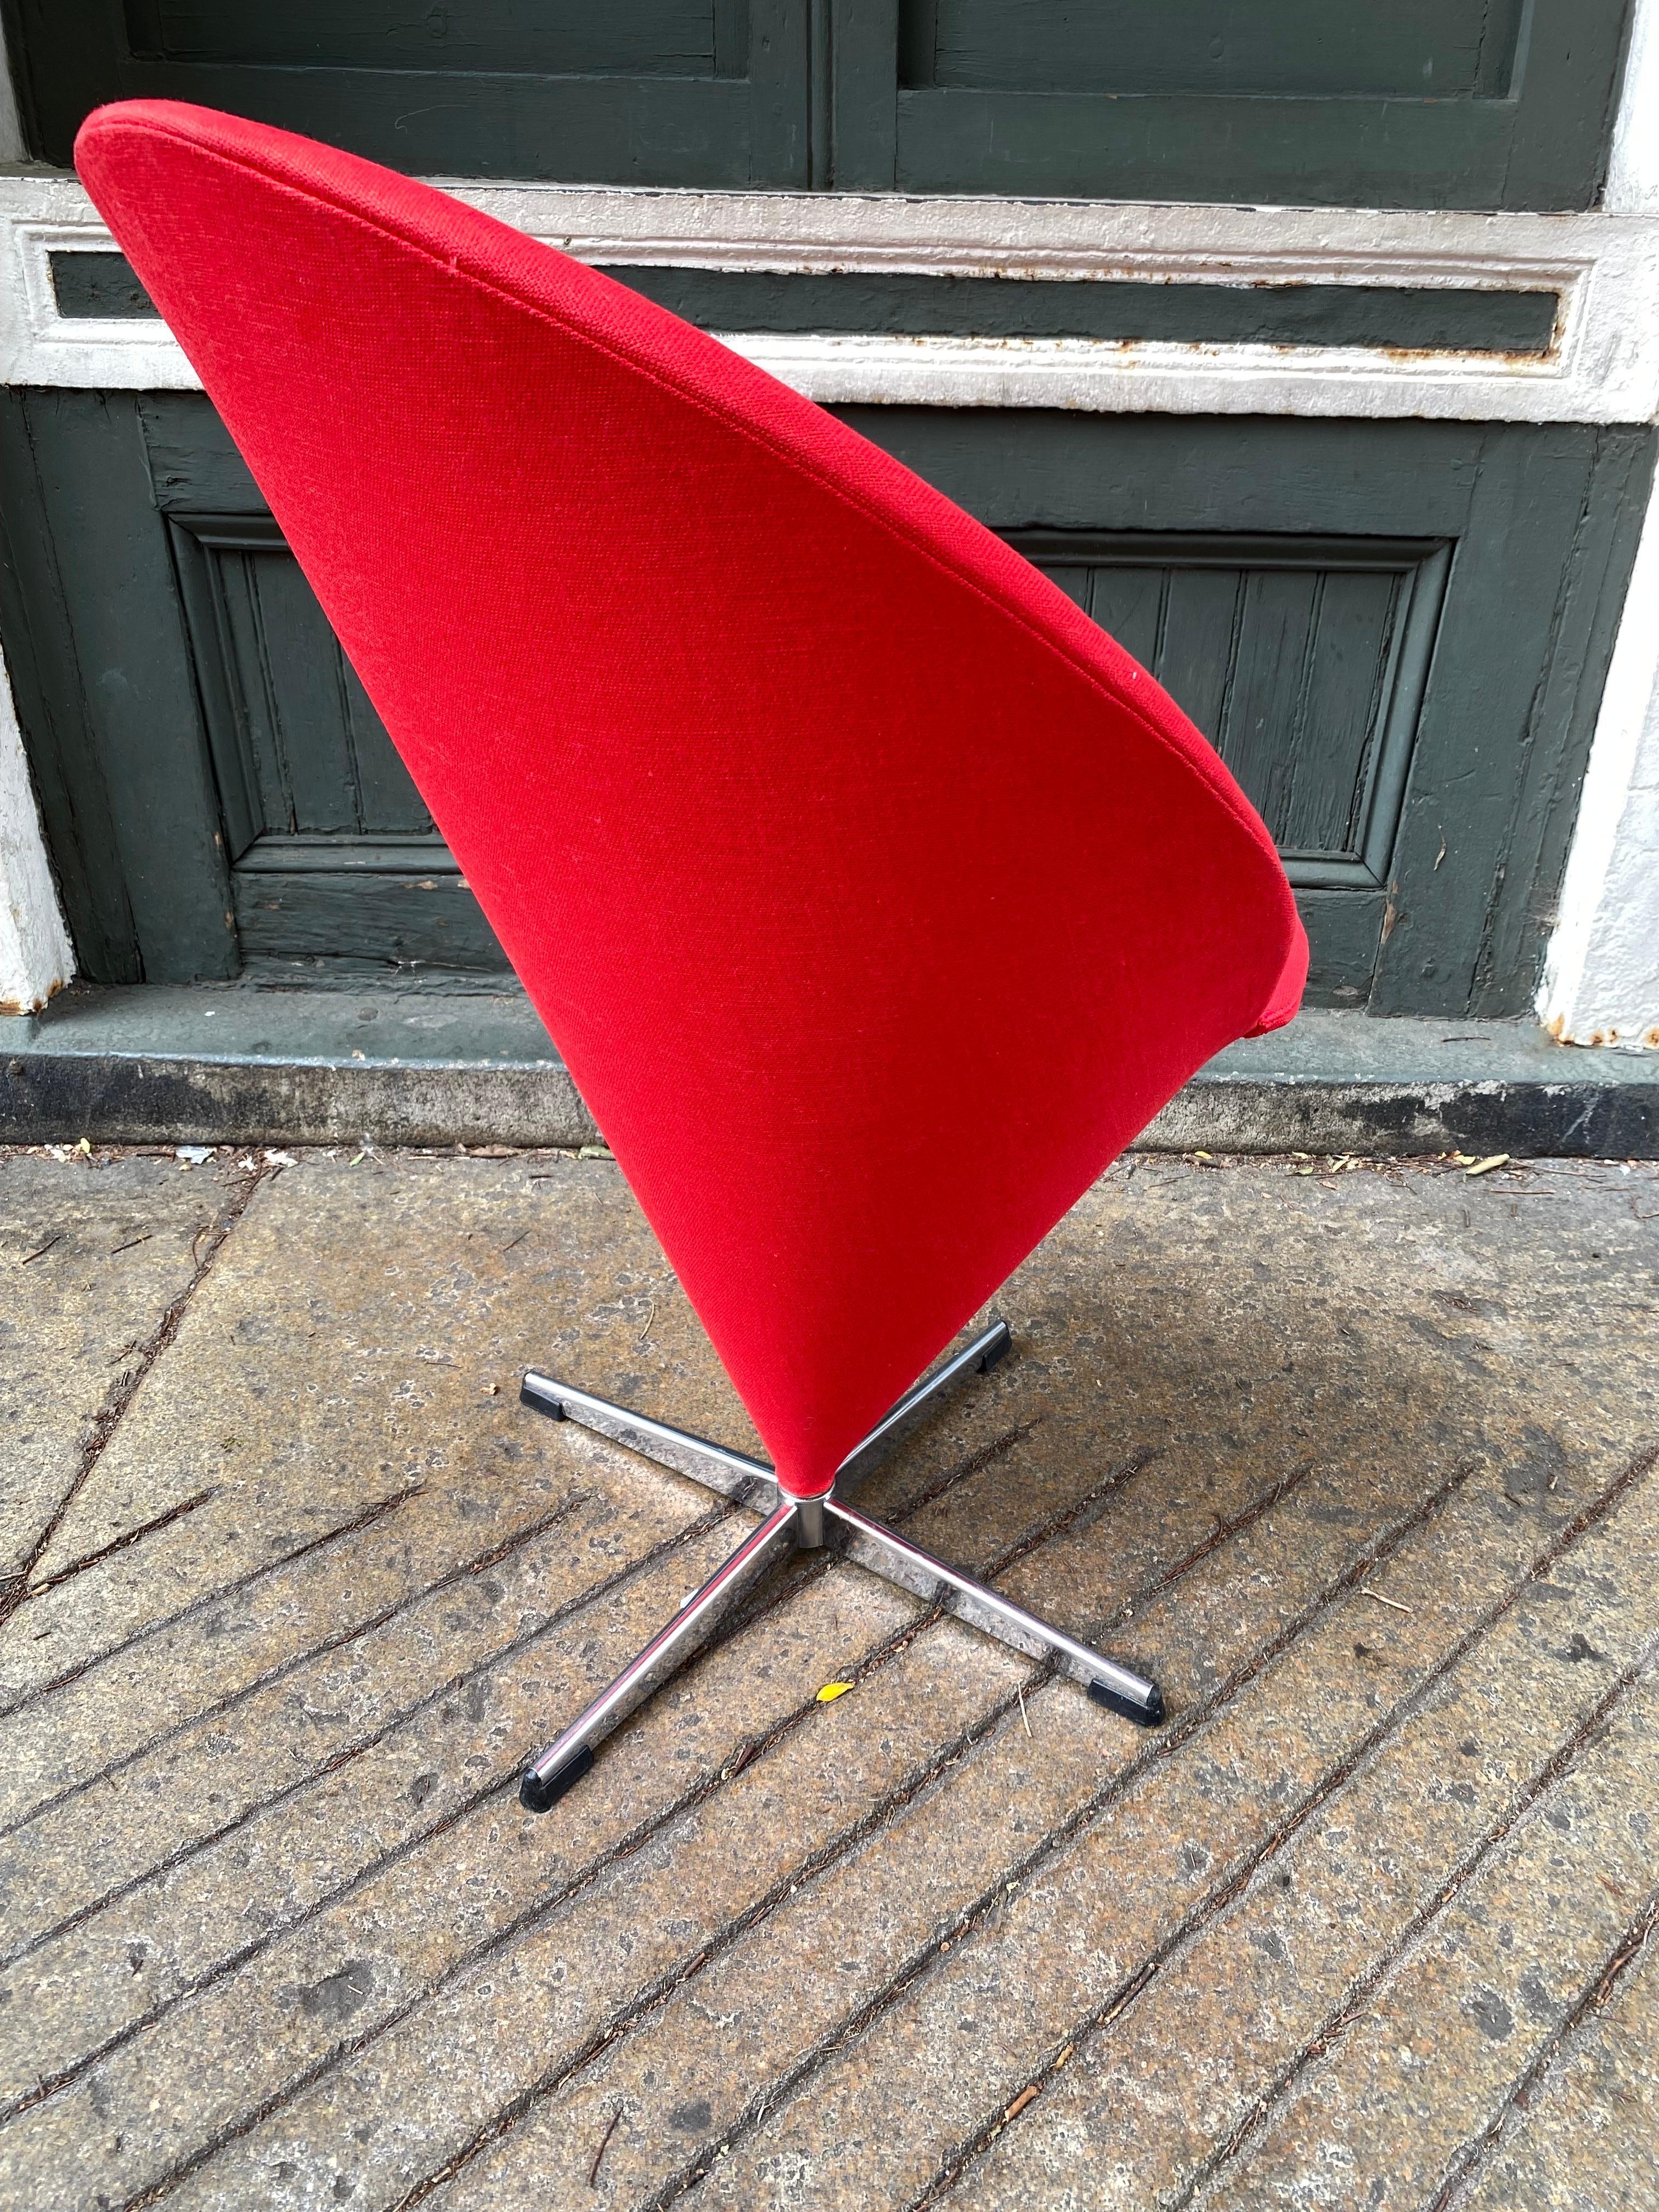 Verner Panton Newly Reupholstered Cone Chair In Good Condition For Sale In Philadelphia, PA